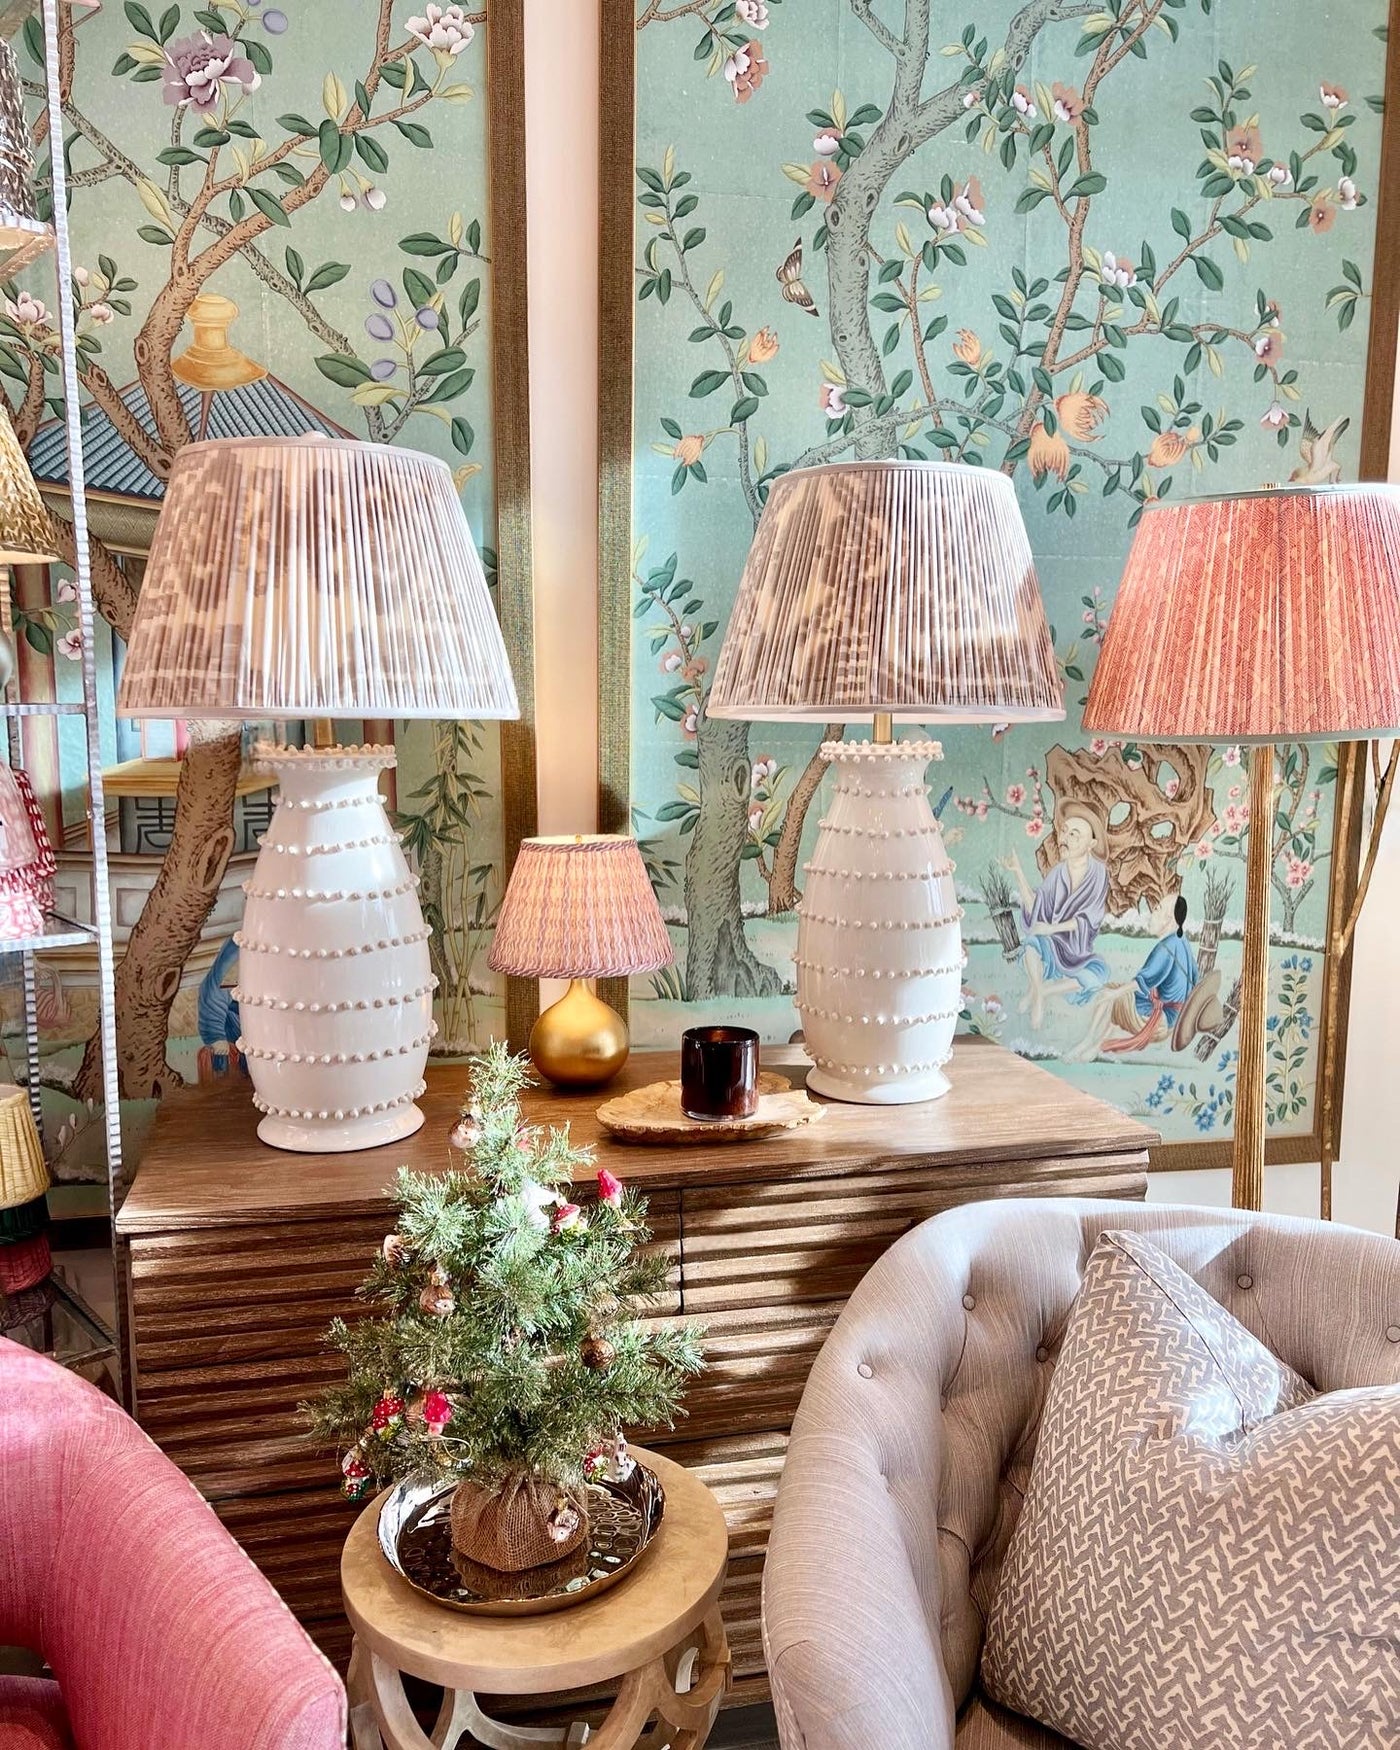 Large Celerie Kemble lamps and ikat lampshades